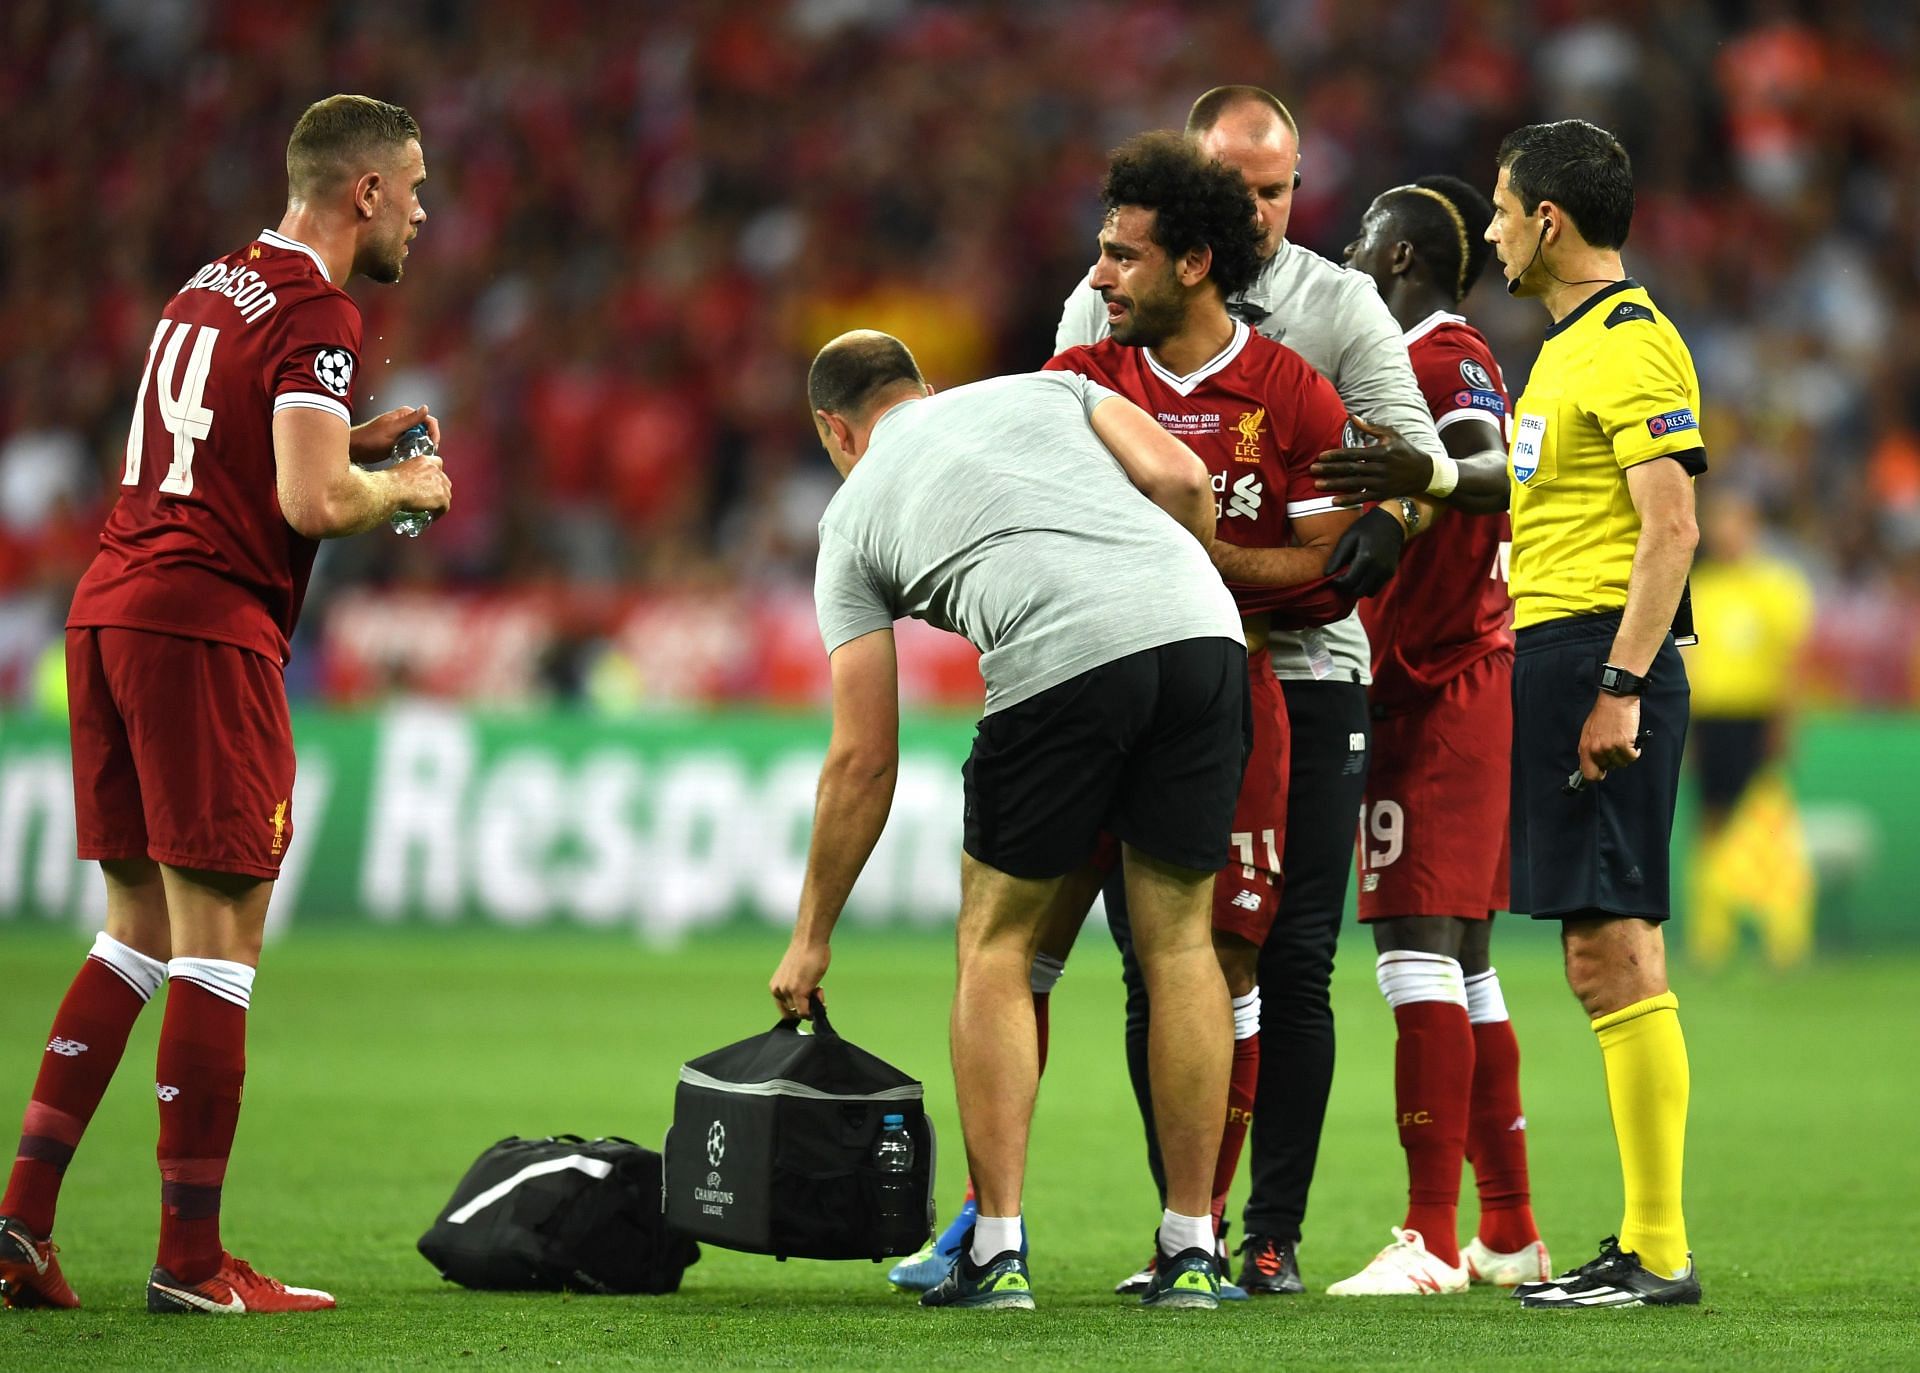 Salah had to come off injured in the 2018 final.